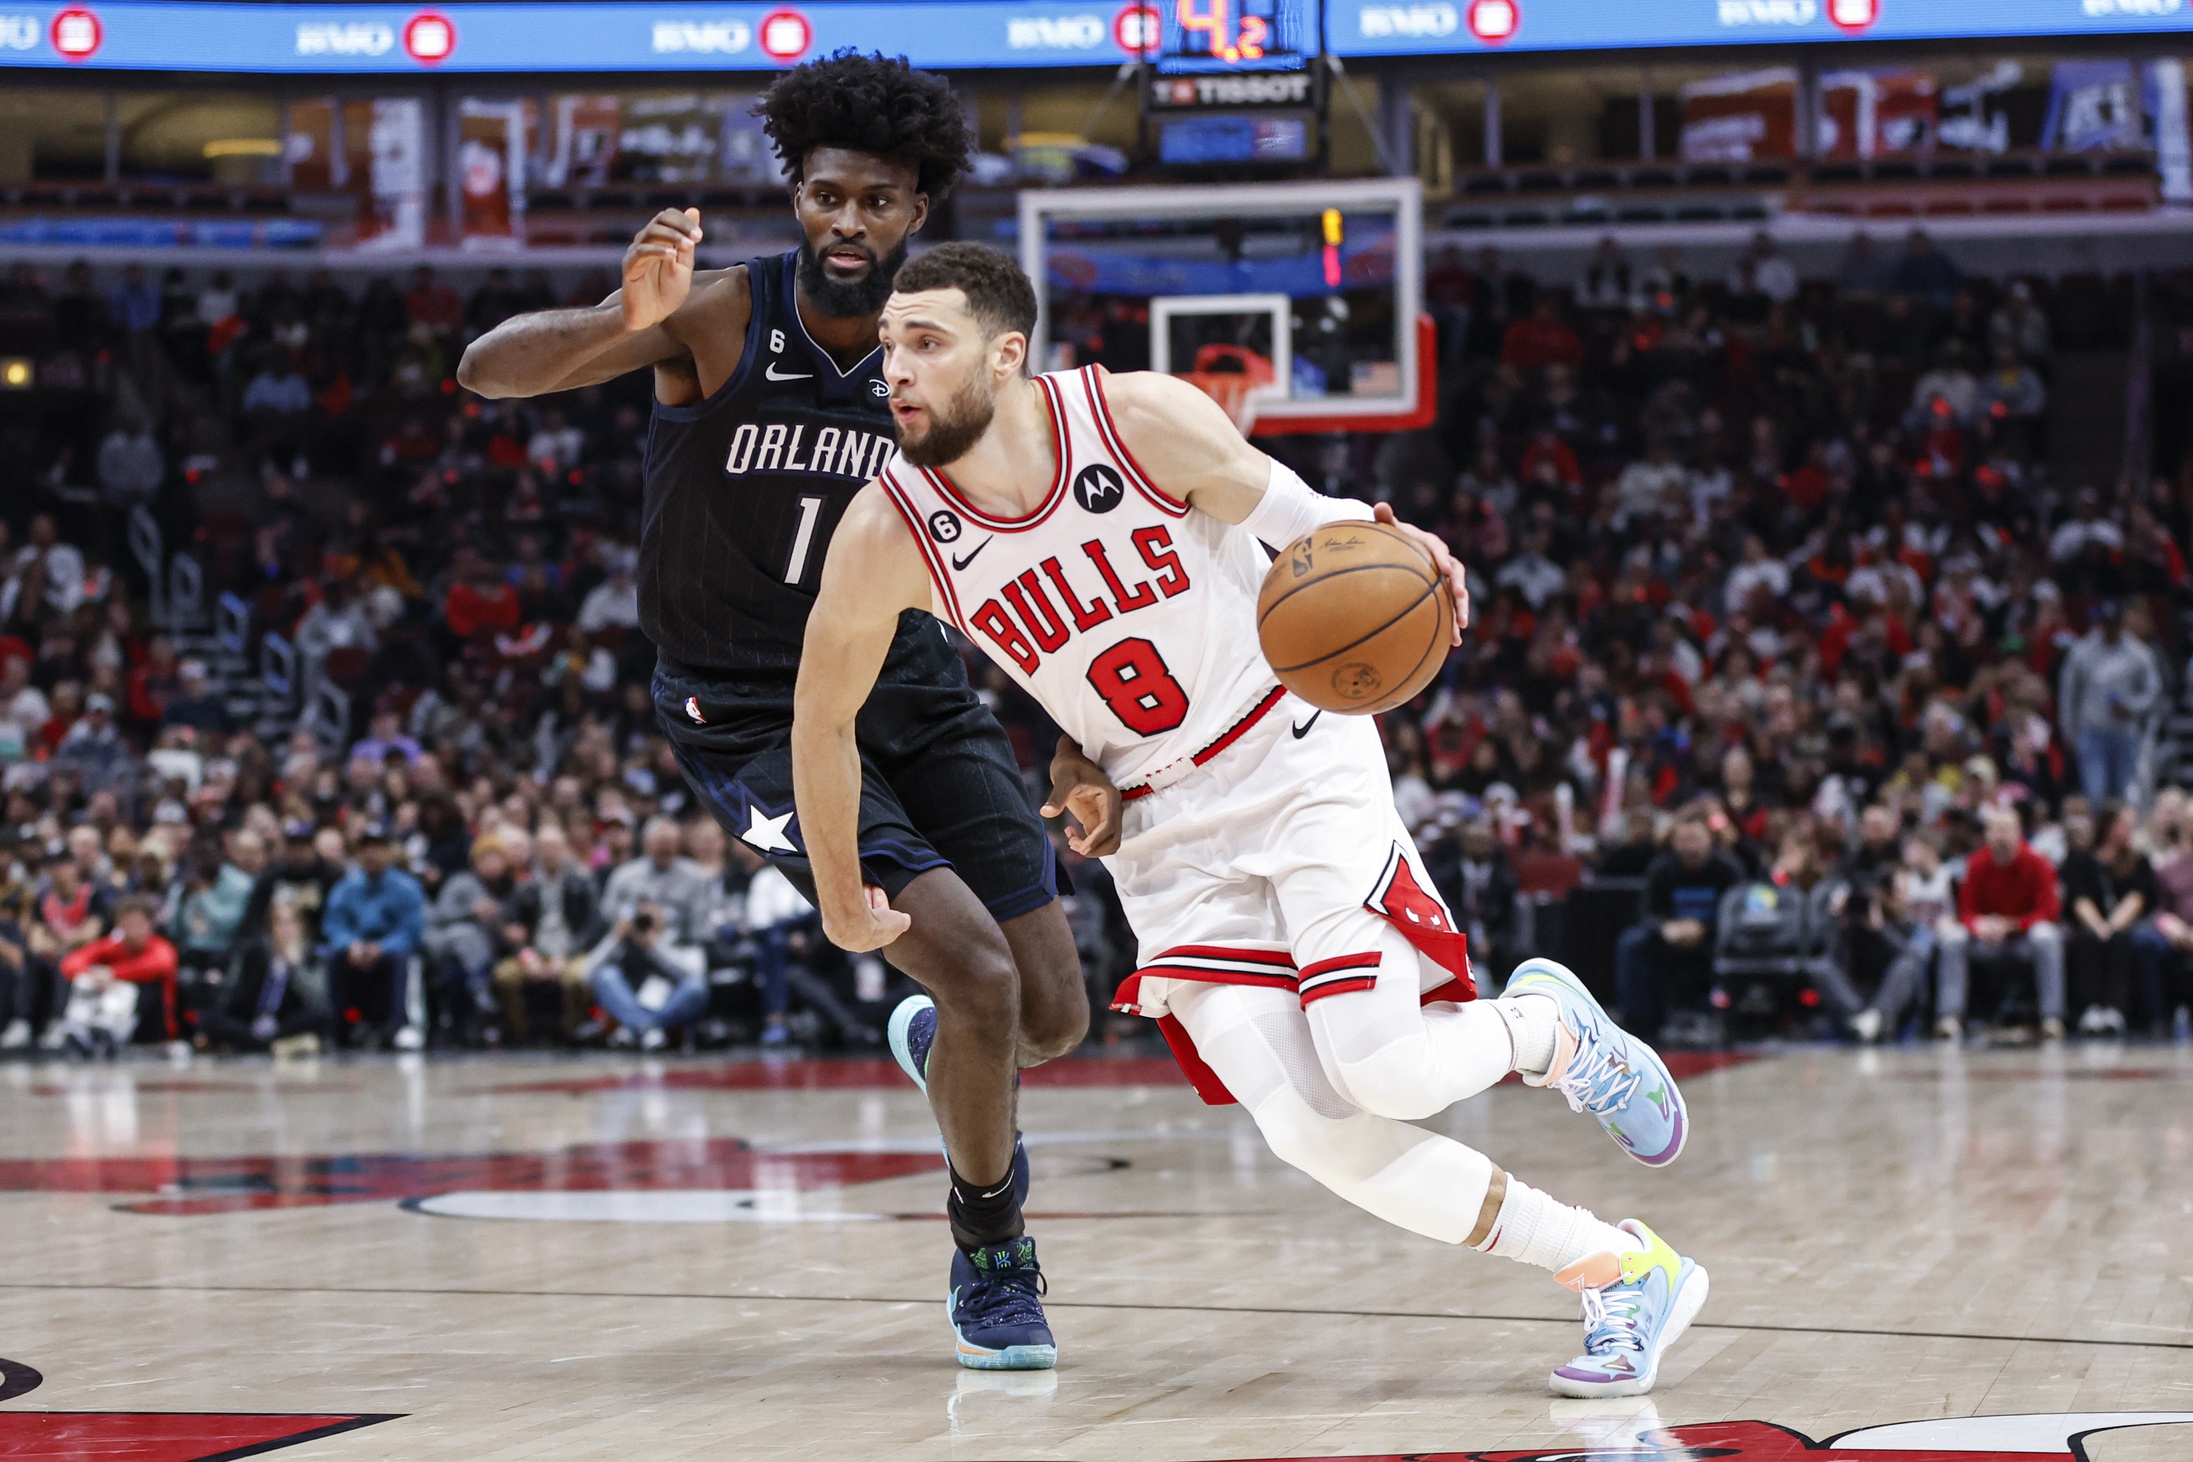 Chicago Bulls guard Zach LaVine (8) drives to the basket against Orlando Magic forward Jonathan Isaac (1) during the first half at United Center. Mandatory Credit: Kamil Krzaczynski-USA TODAY Sports